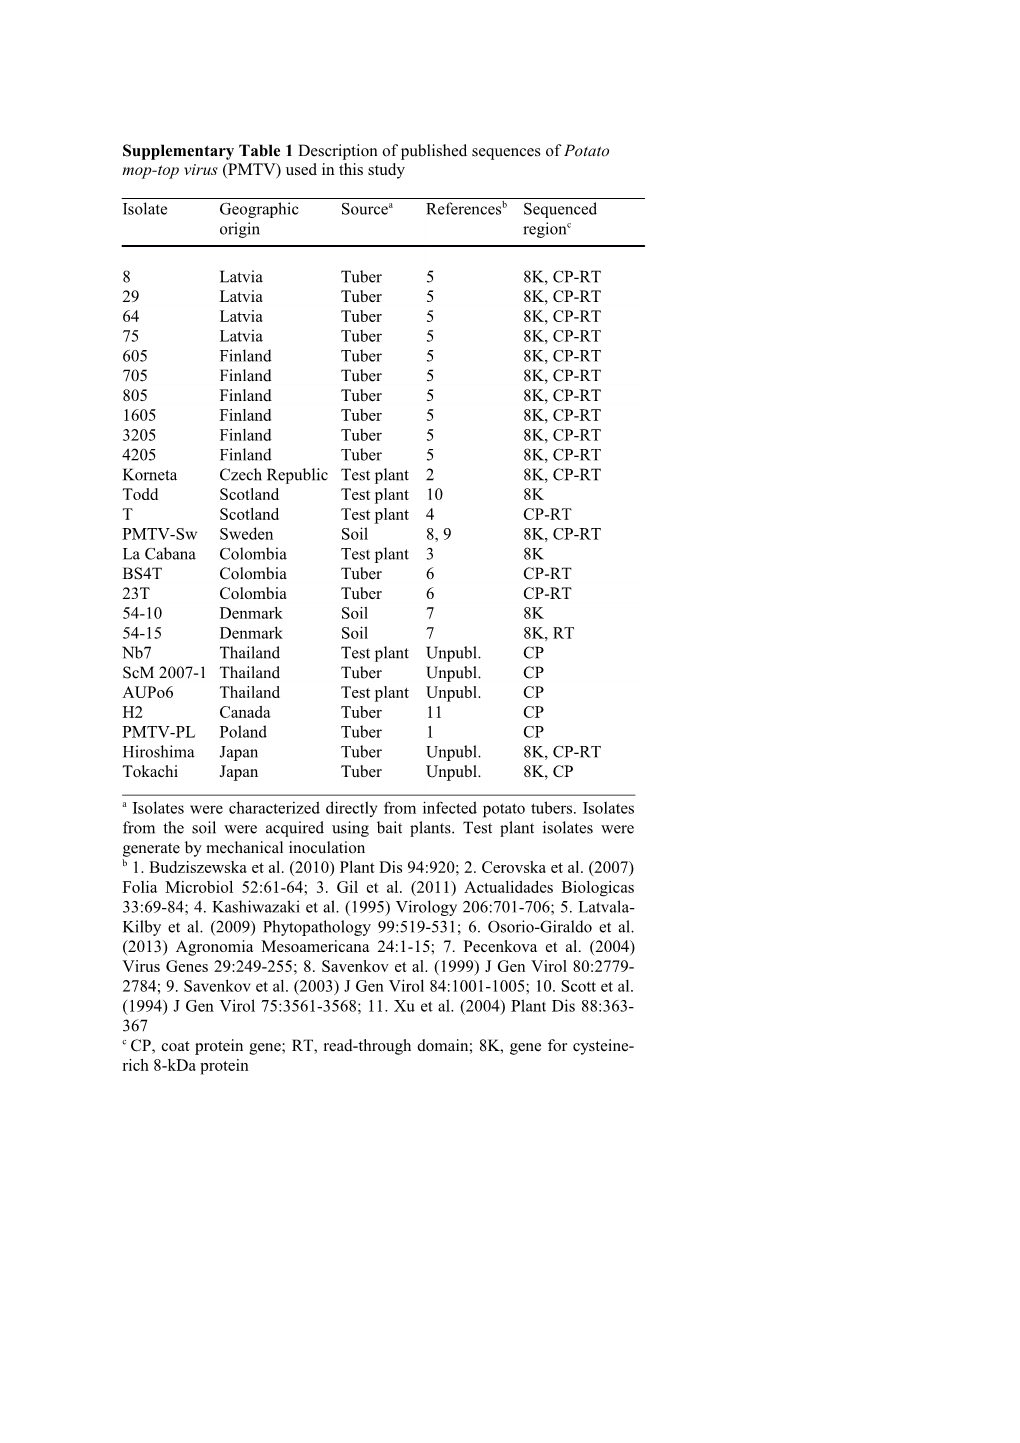 Supplementarytable 1 Description of Published Sequences of Potato